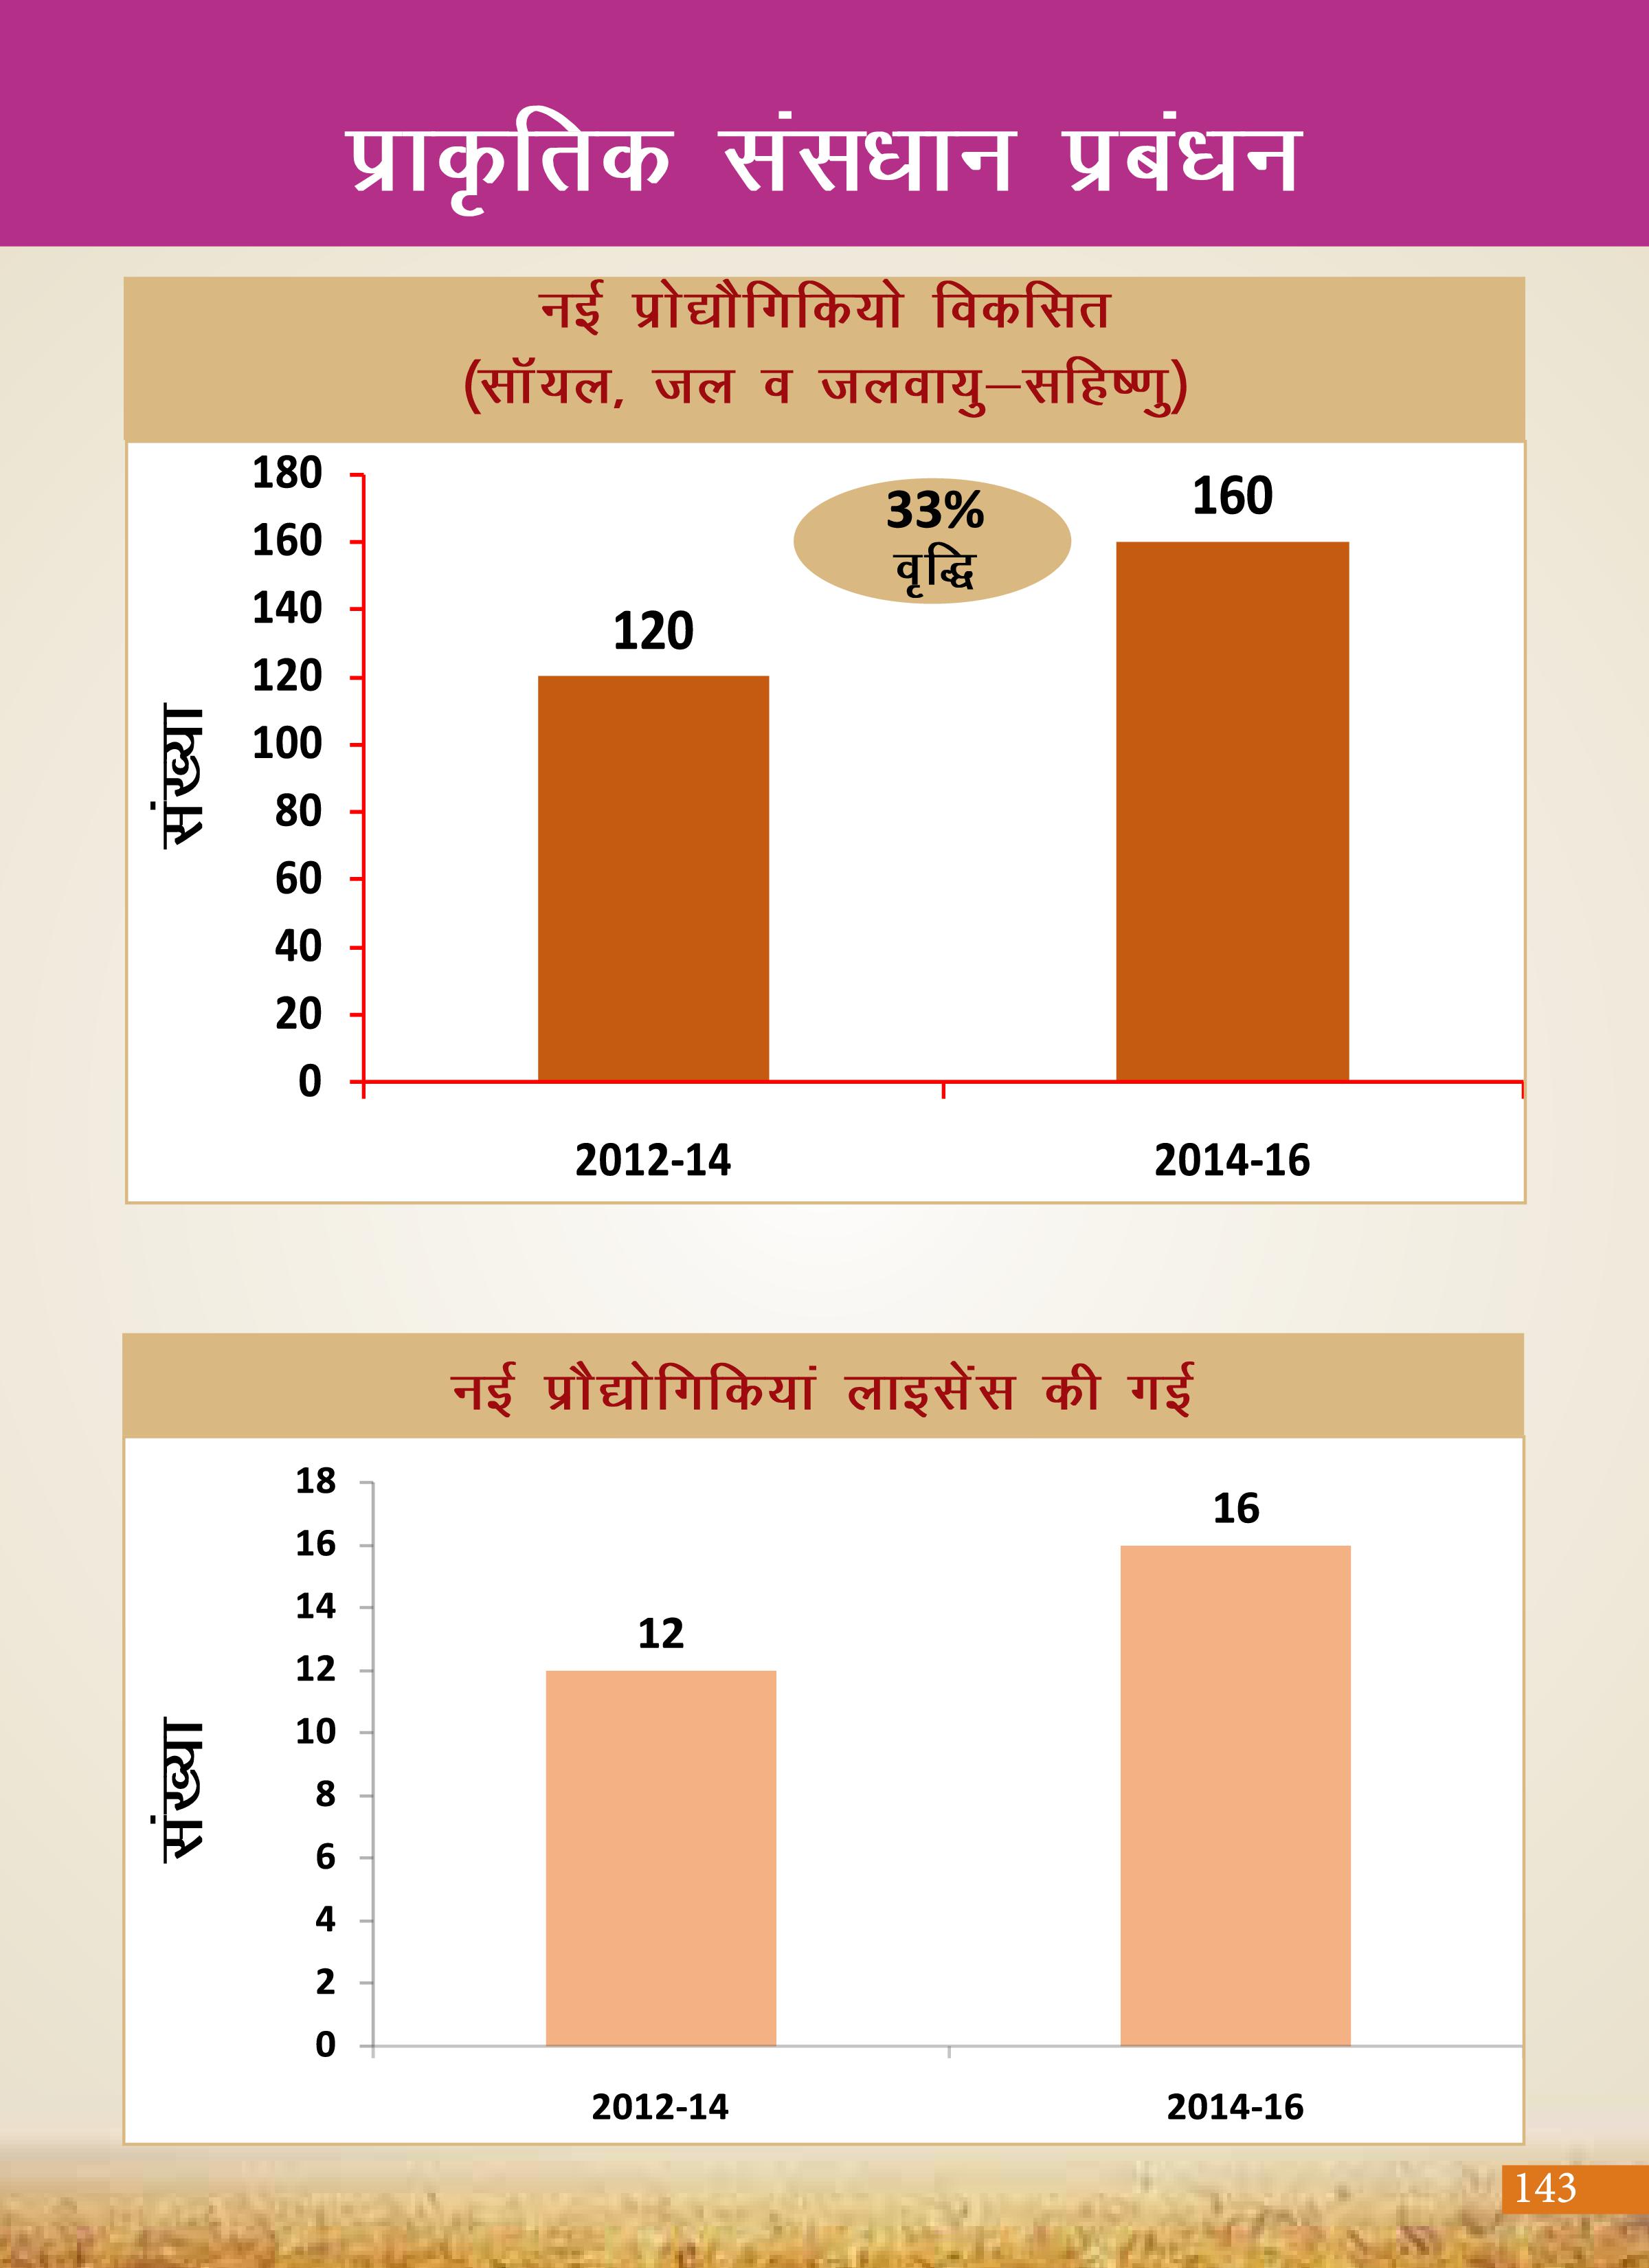 Agricultural Advancement, Our Priority - Two years of Modi Government